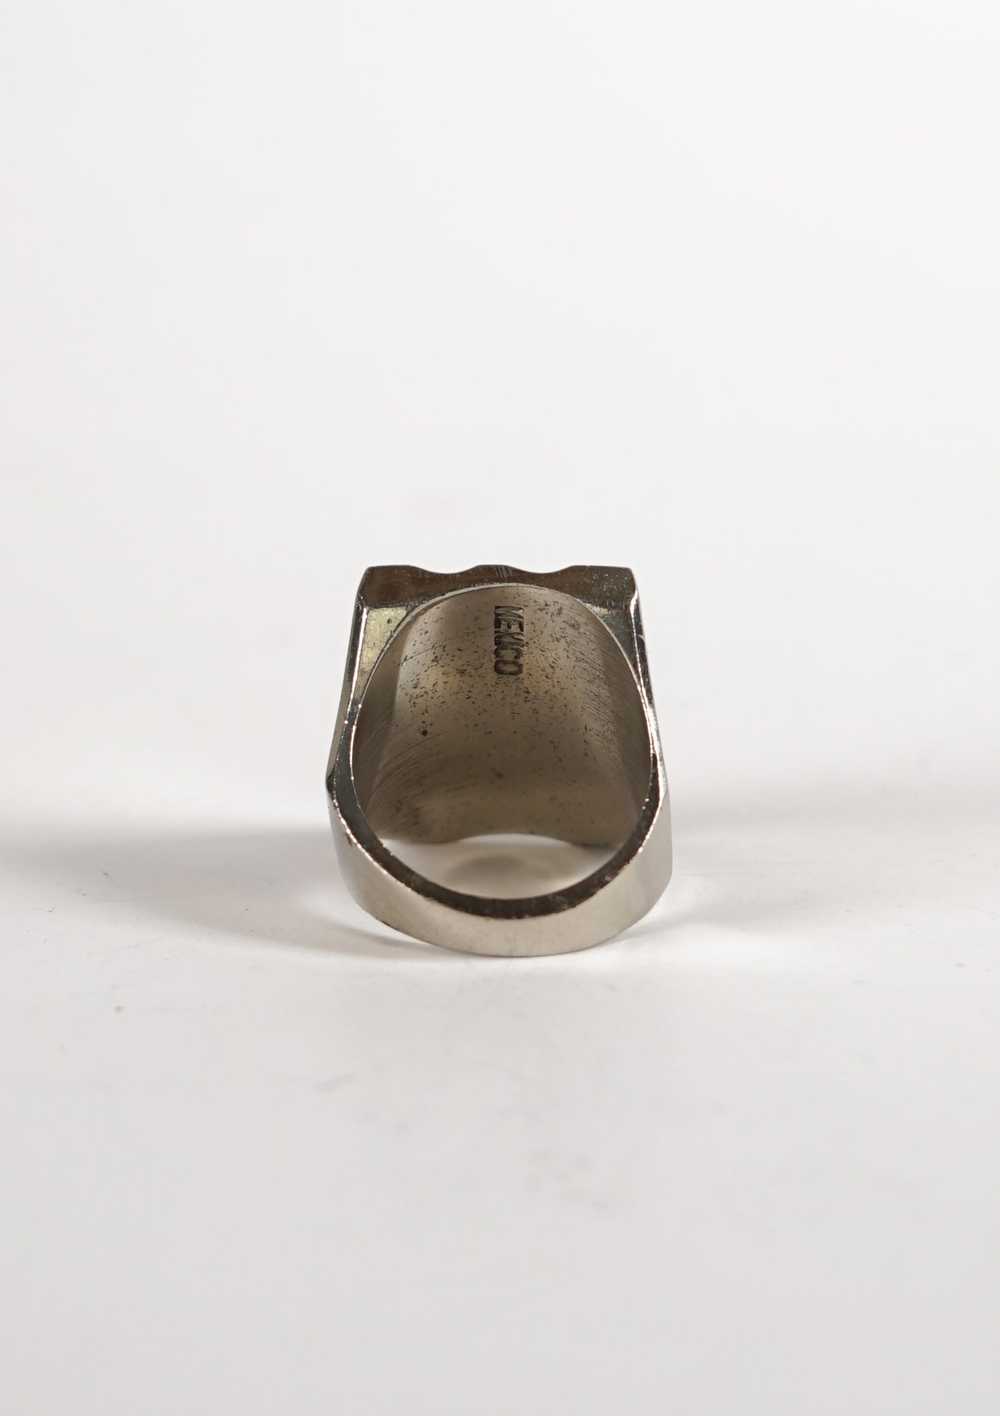 Mexican Biker Ring / Horse - image 4